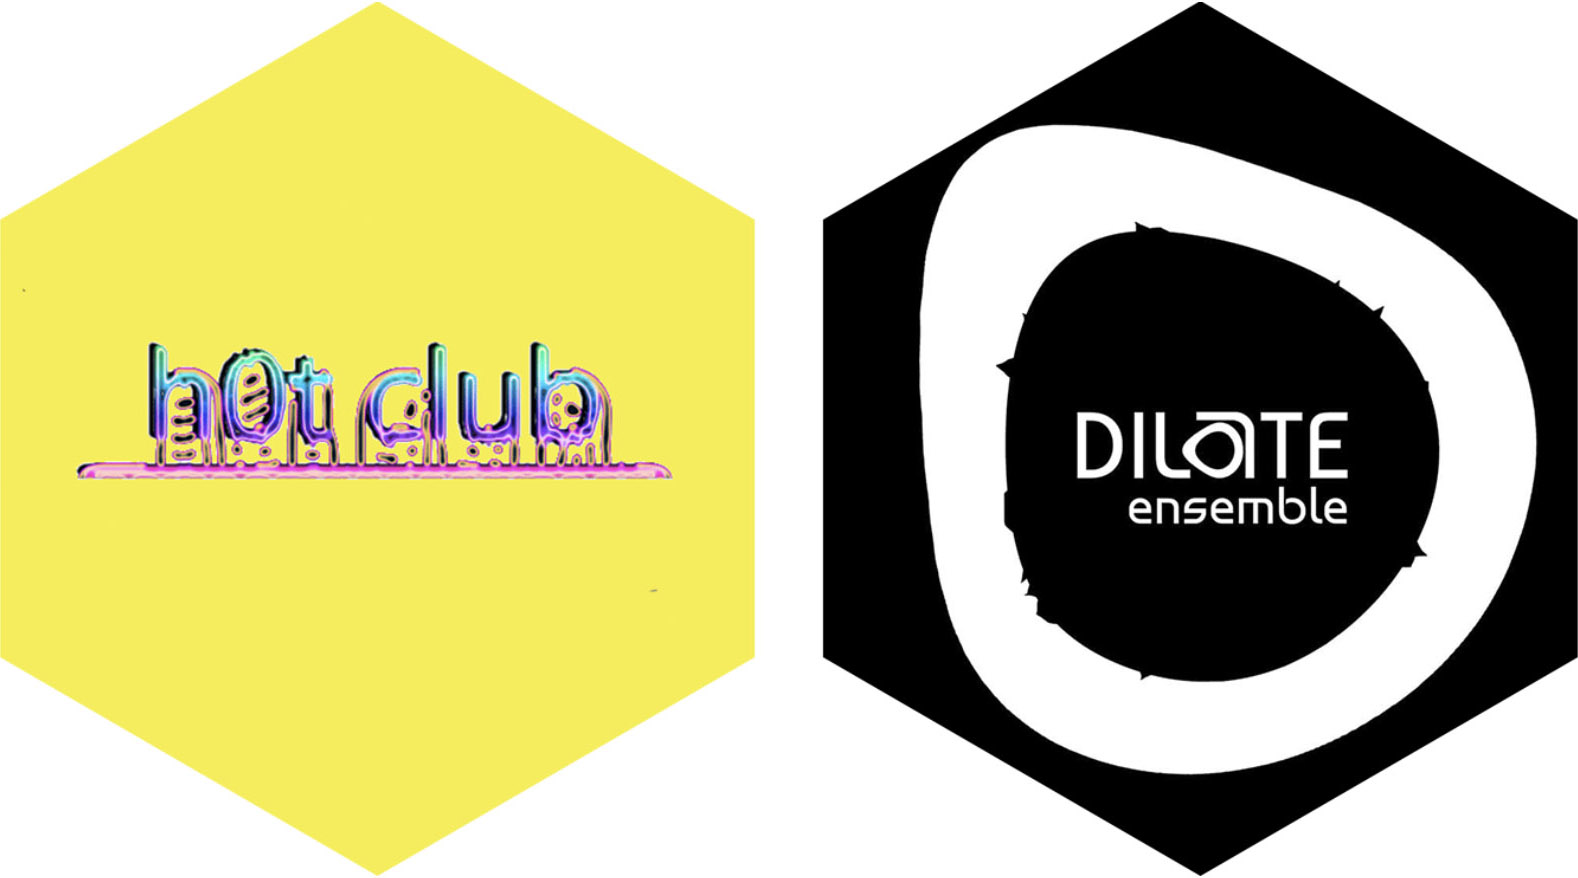 Logos for two artist collectives: h0t club and Dilate Ensemble